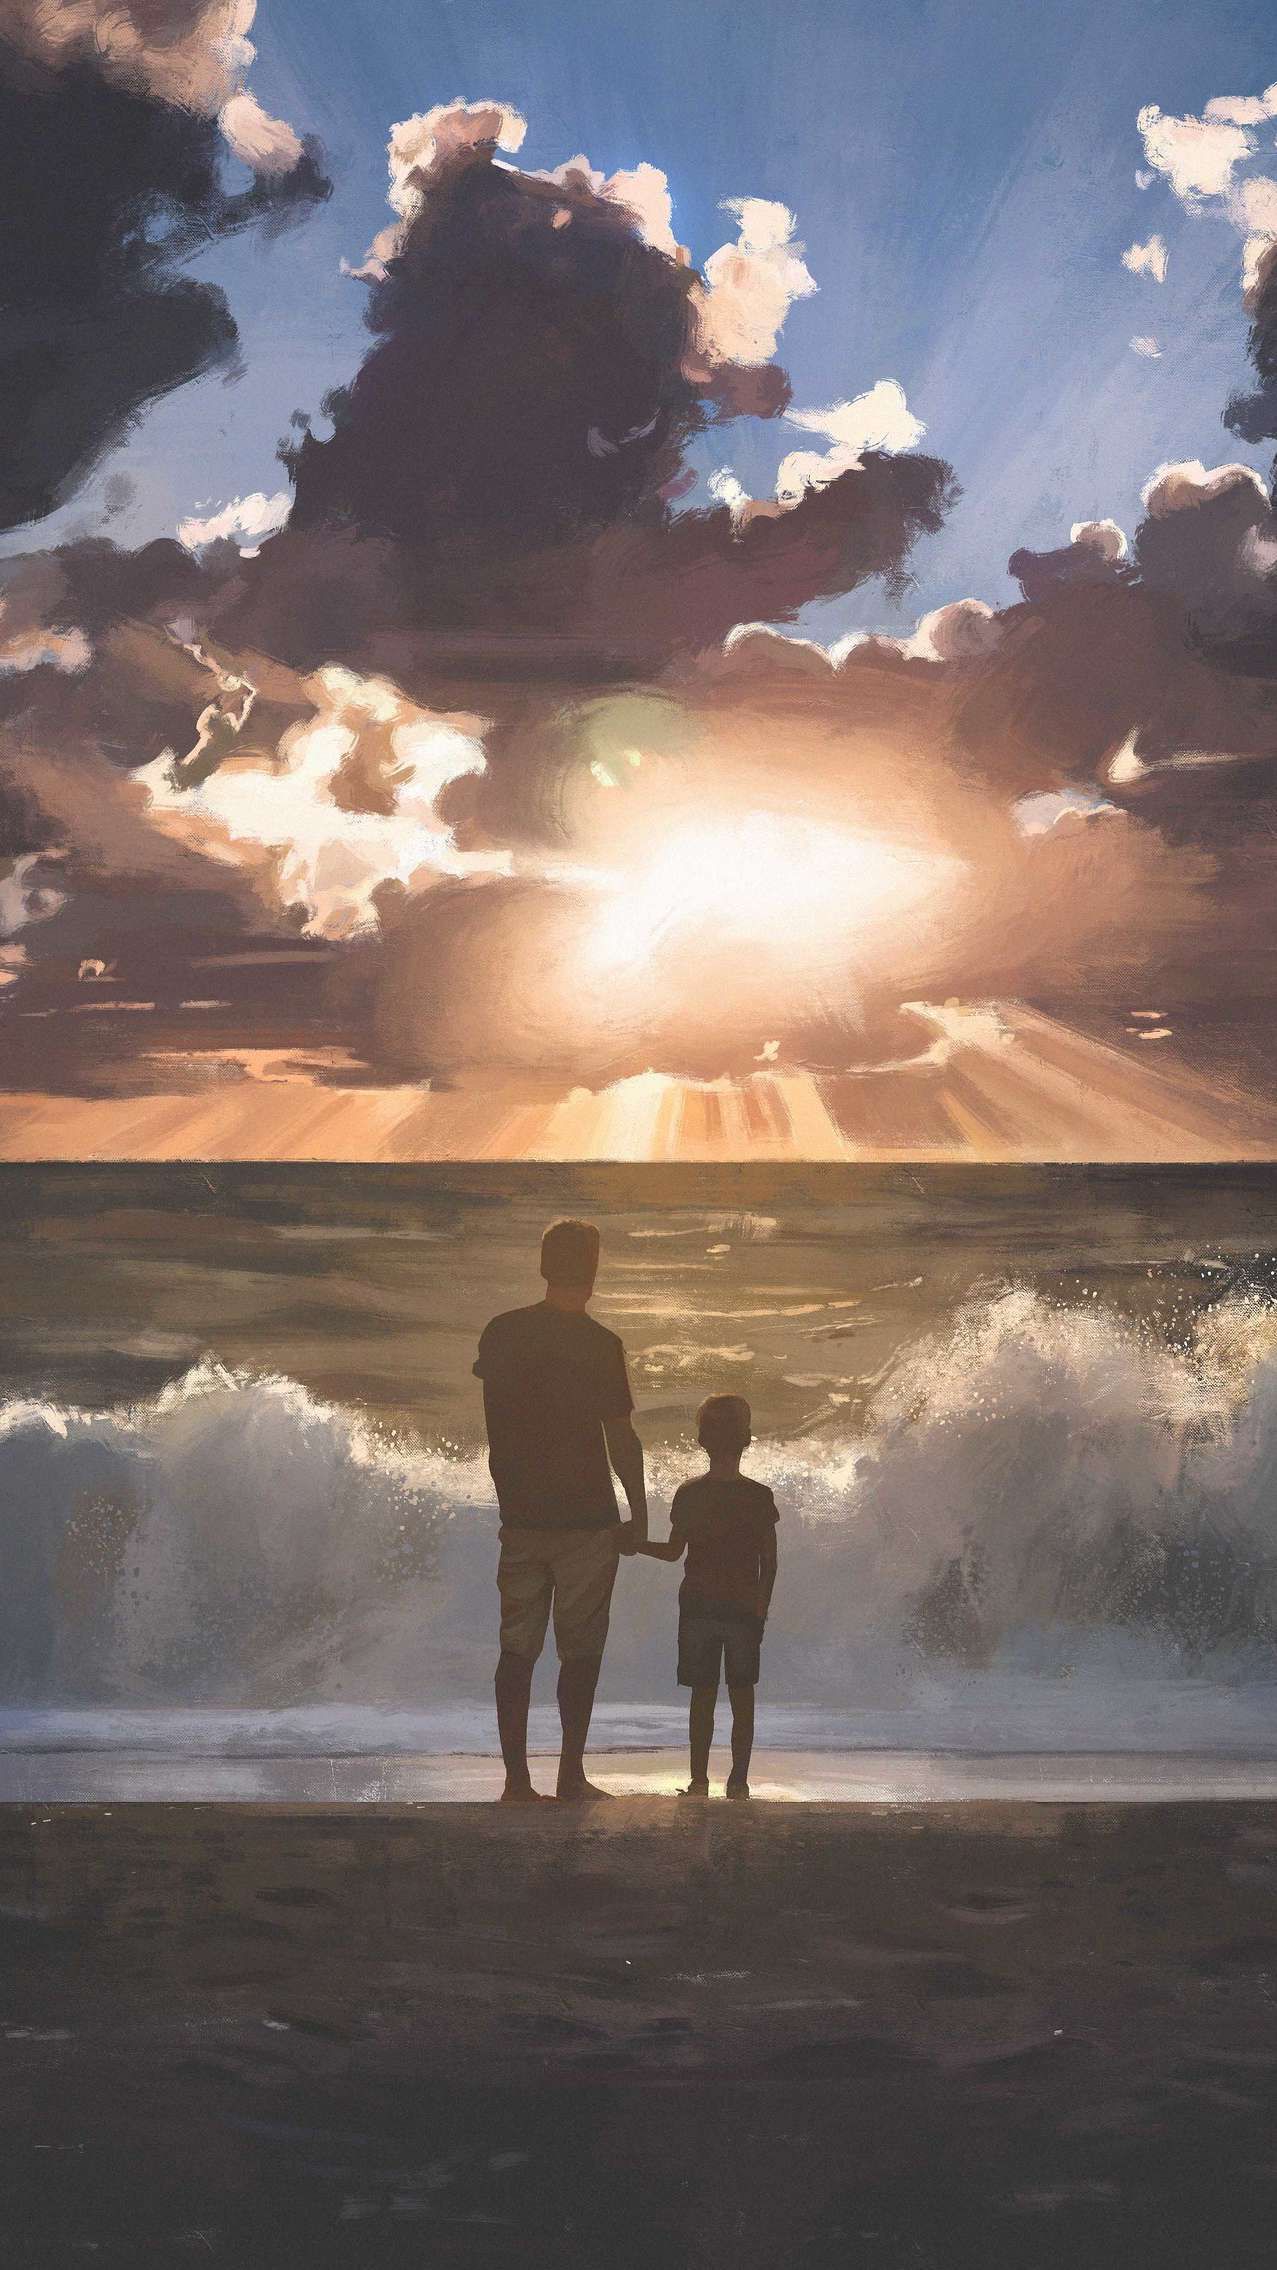 Father and Son iPhone Wallpaper. Girl iphone wallpaper, HD nature wallpaper, iPhone wallpaper